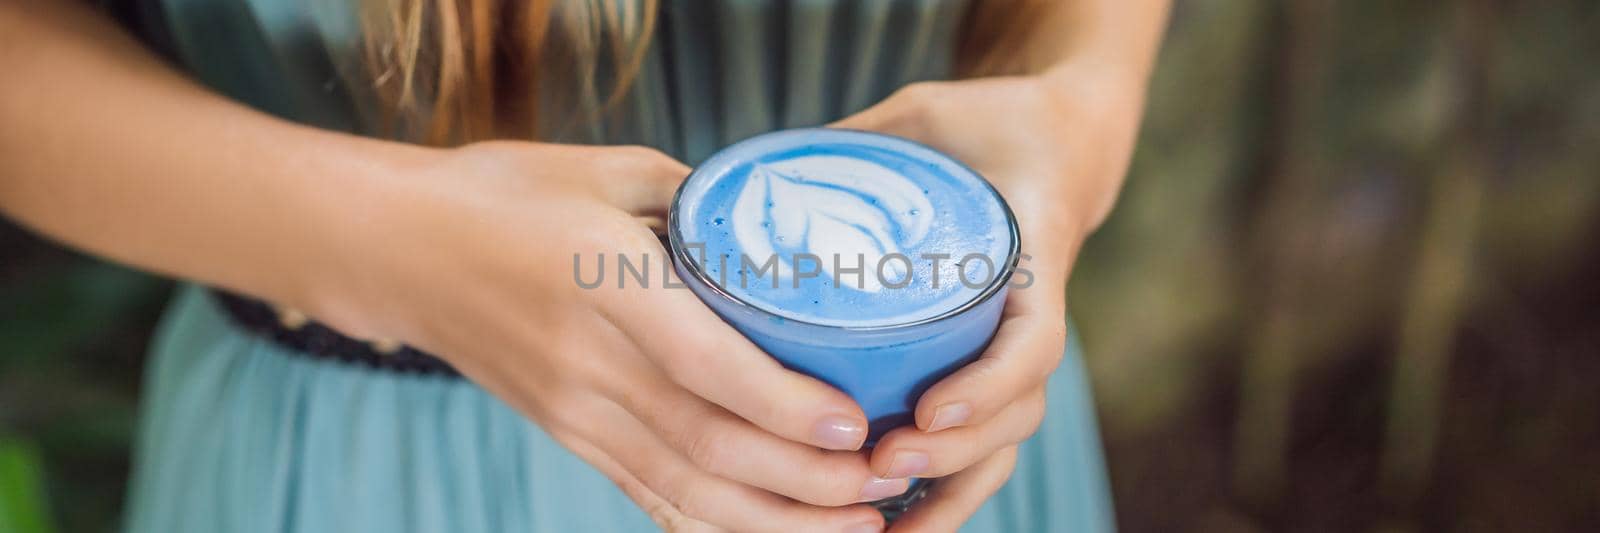 Young woman having a mediterranean breakfast seated at sofa and drinks Trendy drink: Blue latte. Hot butterfly pea latte or blue spirulina latte. BANNER, LONG FORMAT